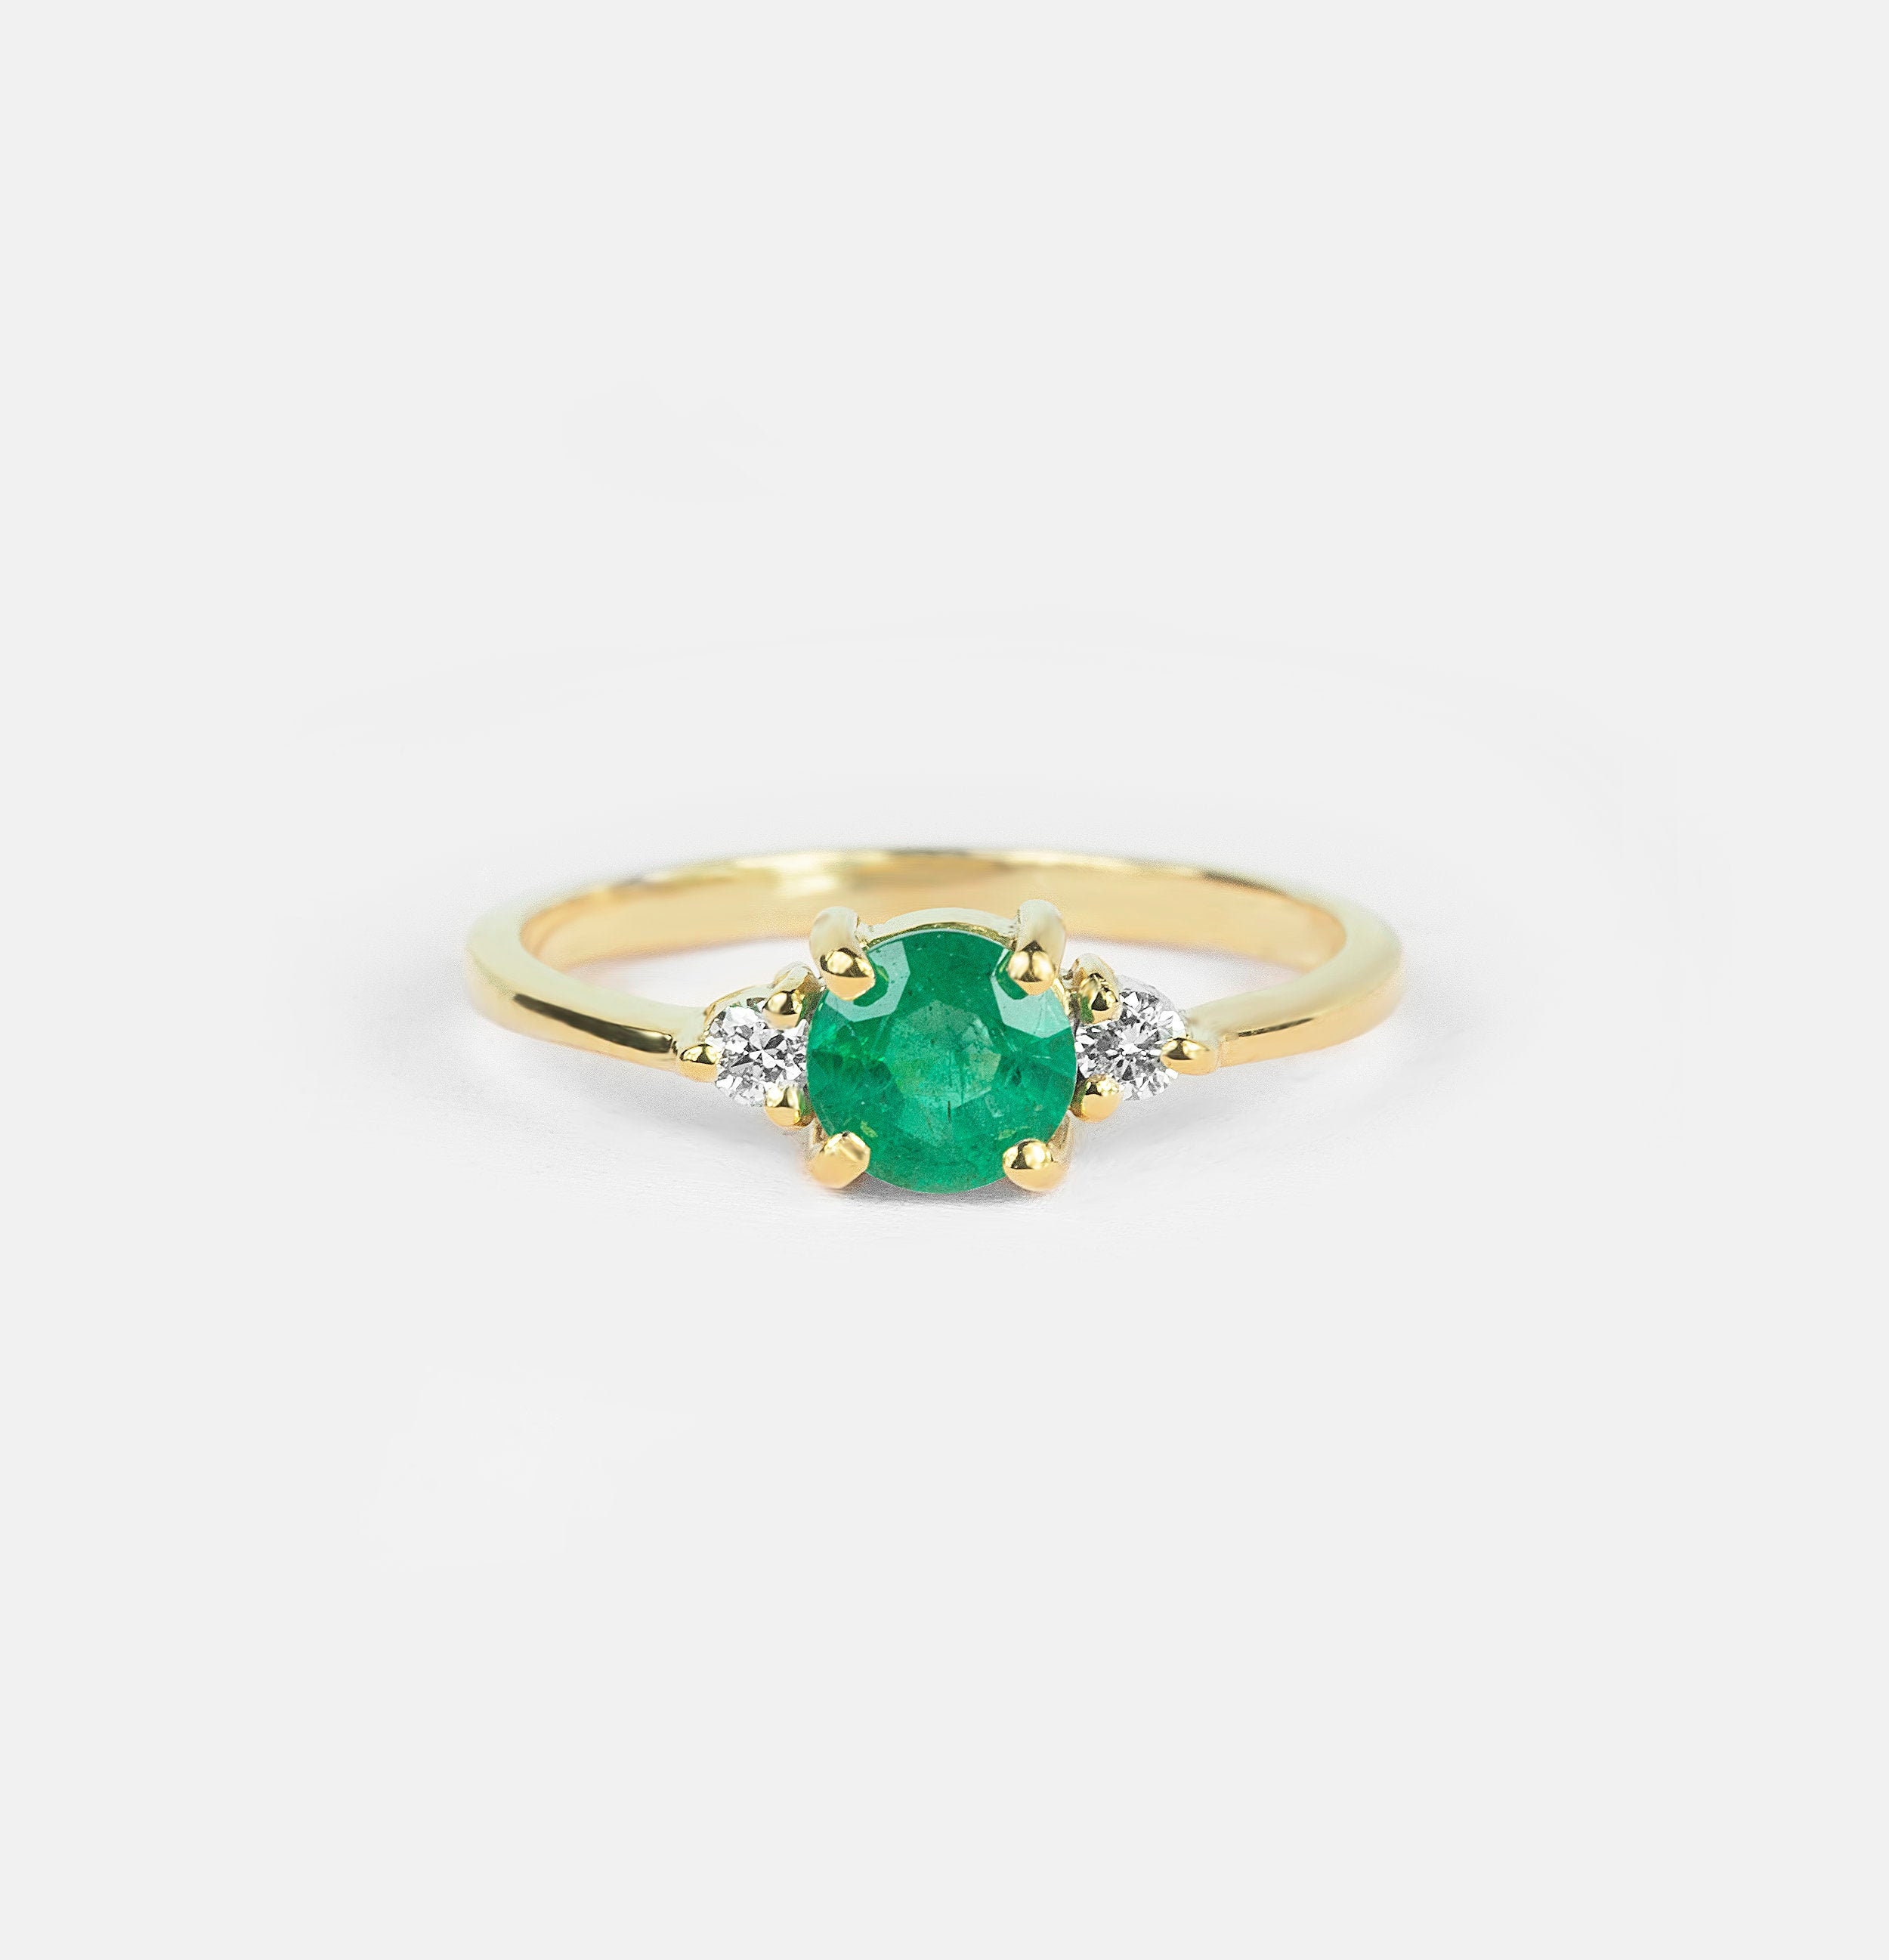 Natural Emerald & Diamond Yellow Gold Engagement Ring-Three Stone Ring-Promise Ring-Anniversary Ring-Emerald Ring